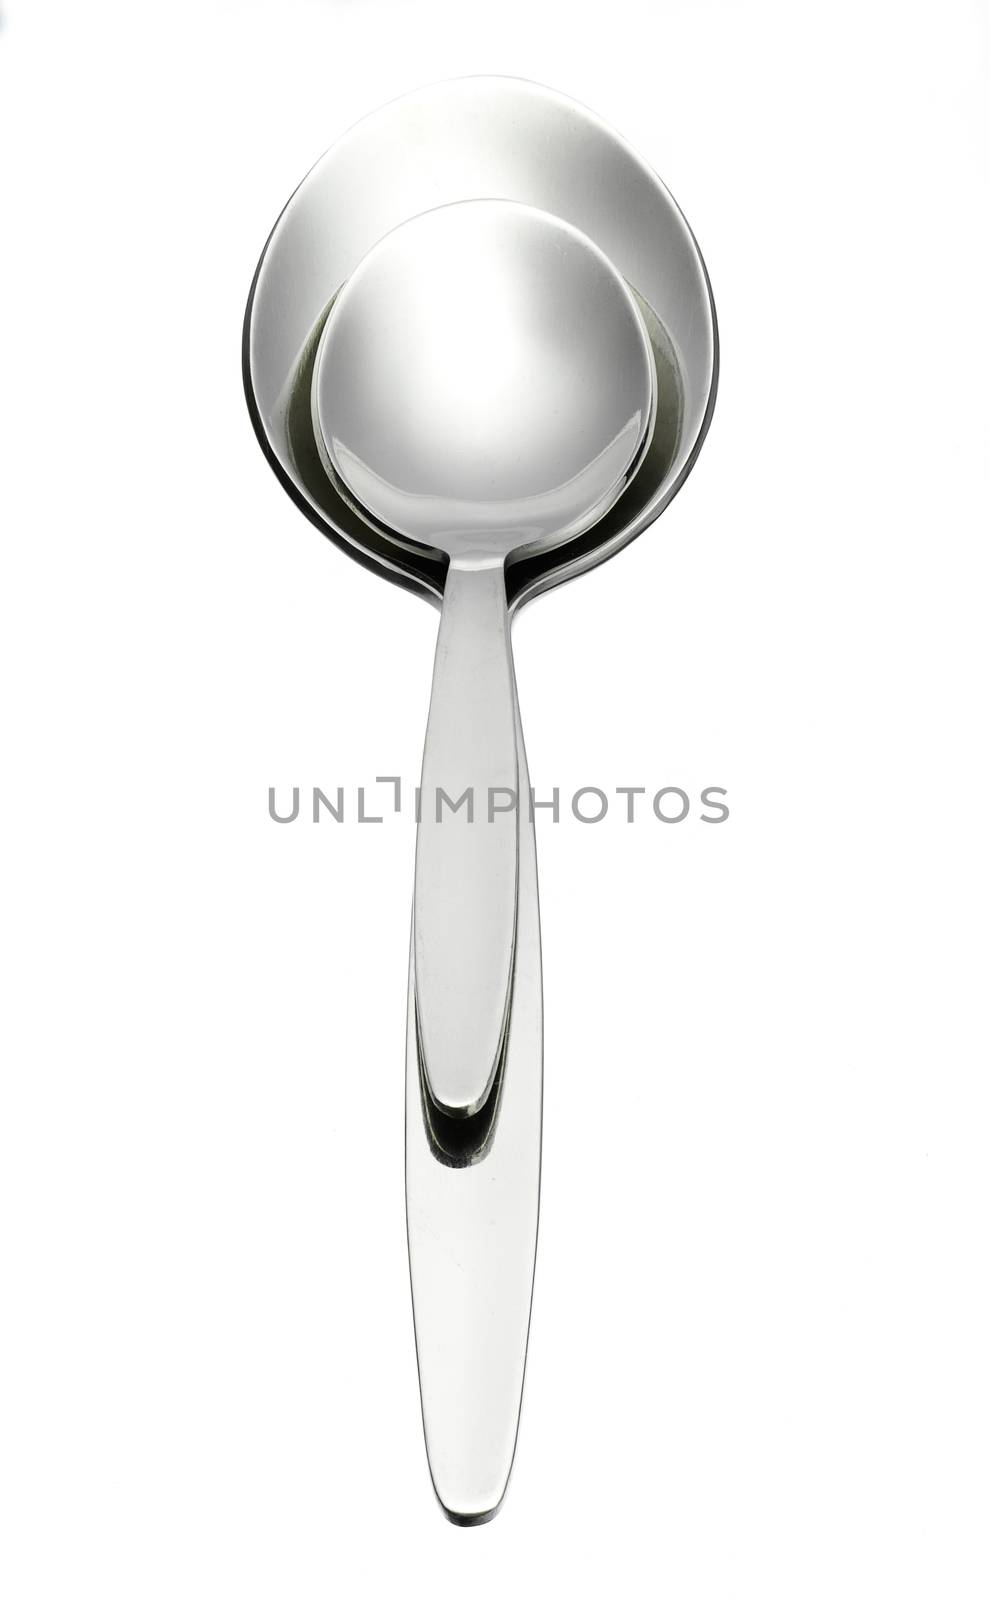 two shiny steel spoon over white background